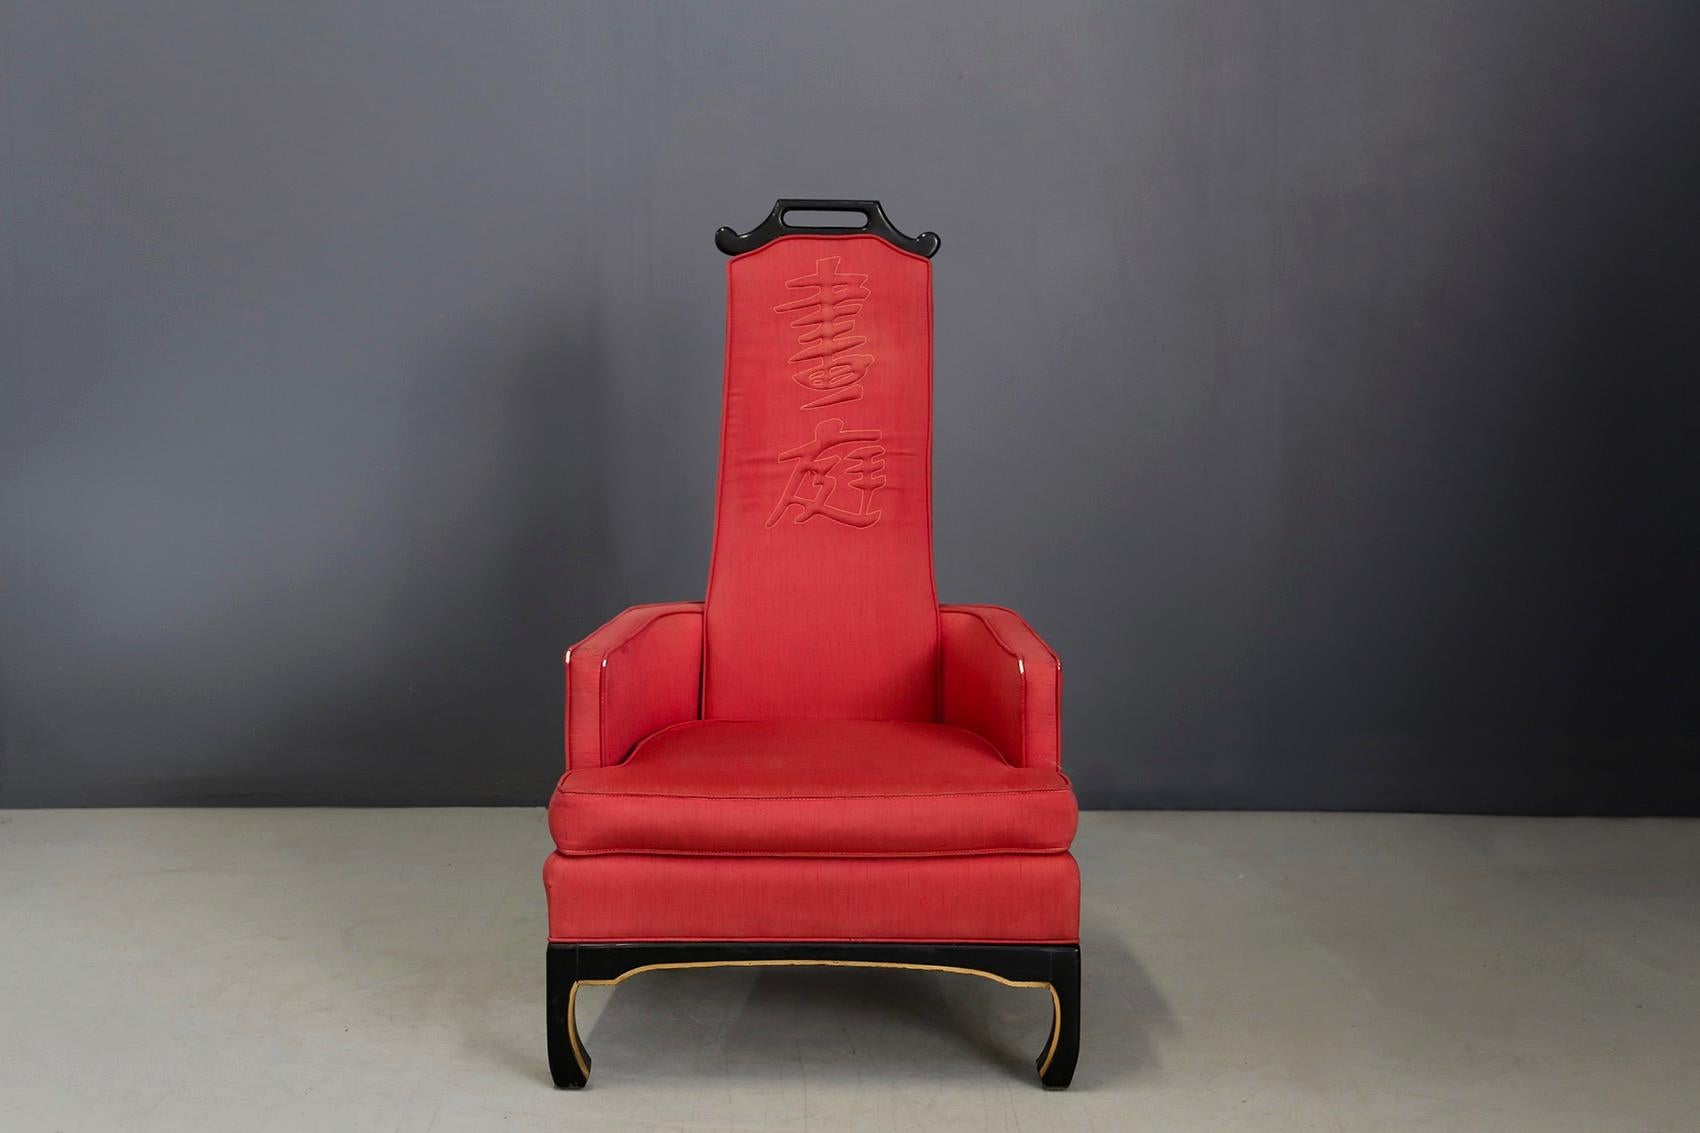 Armchair by Norman Fox MacGregor in Oriental style. The fabric is light red. The backrest has a Chinese inscription. Even its shapes are purely oriental. The armchair can also be classified as a throne. The base of the armchair is ebonized wood with